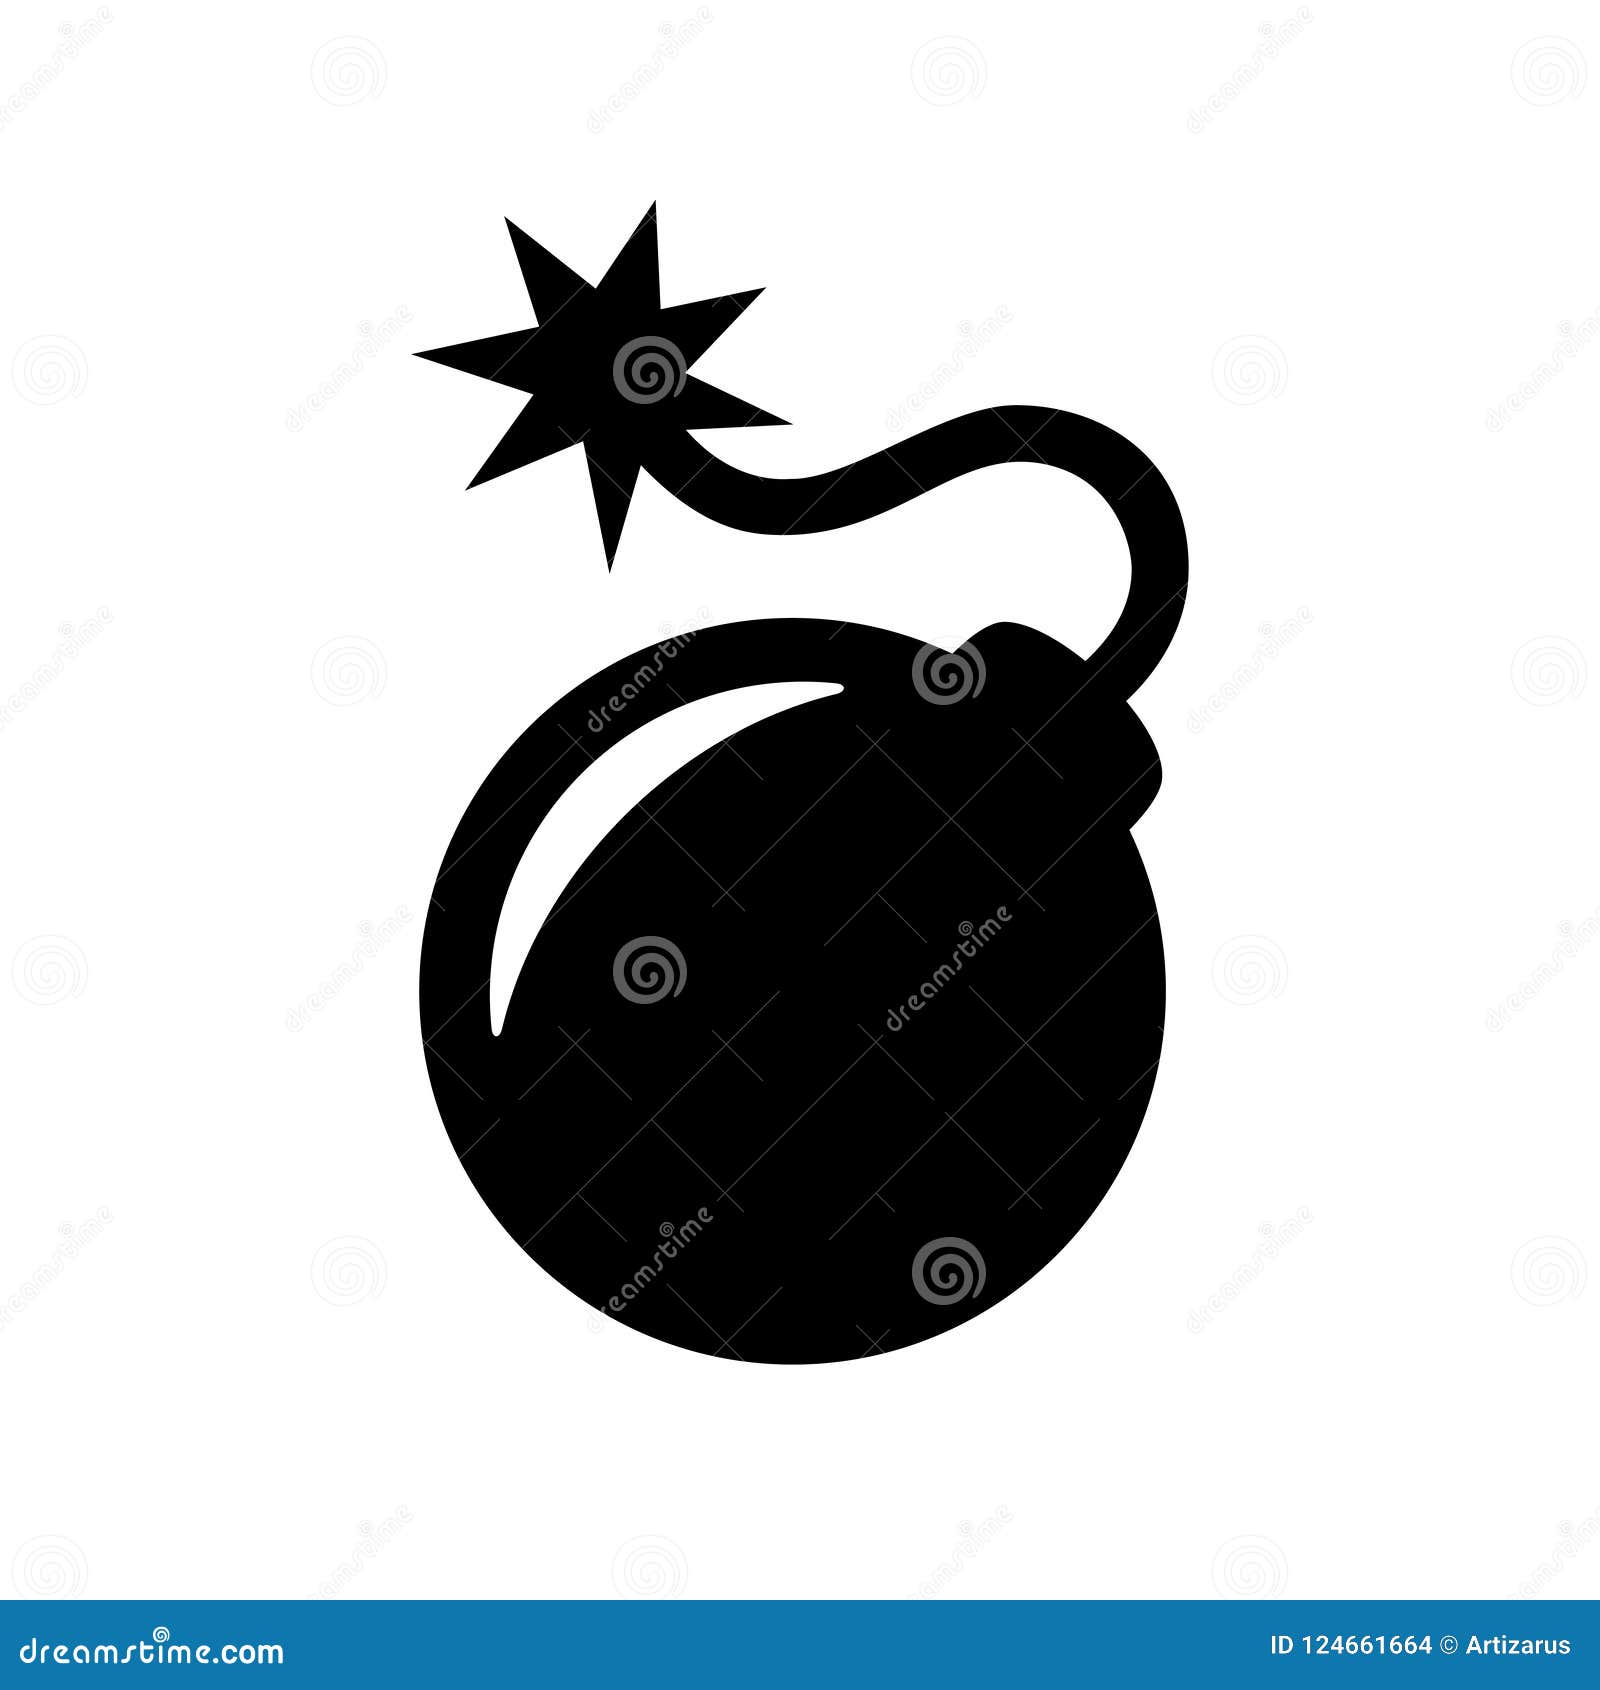 Time Bomb Vector Art, Icons, and Graphics for Free Download